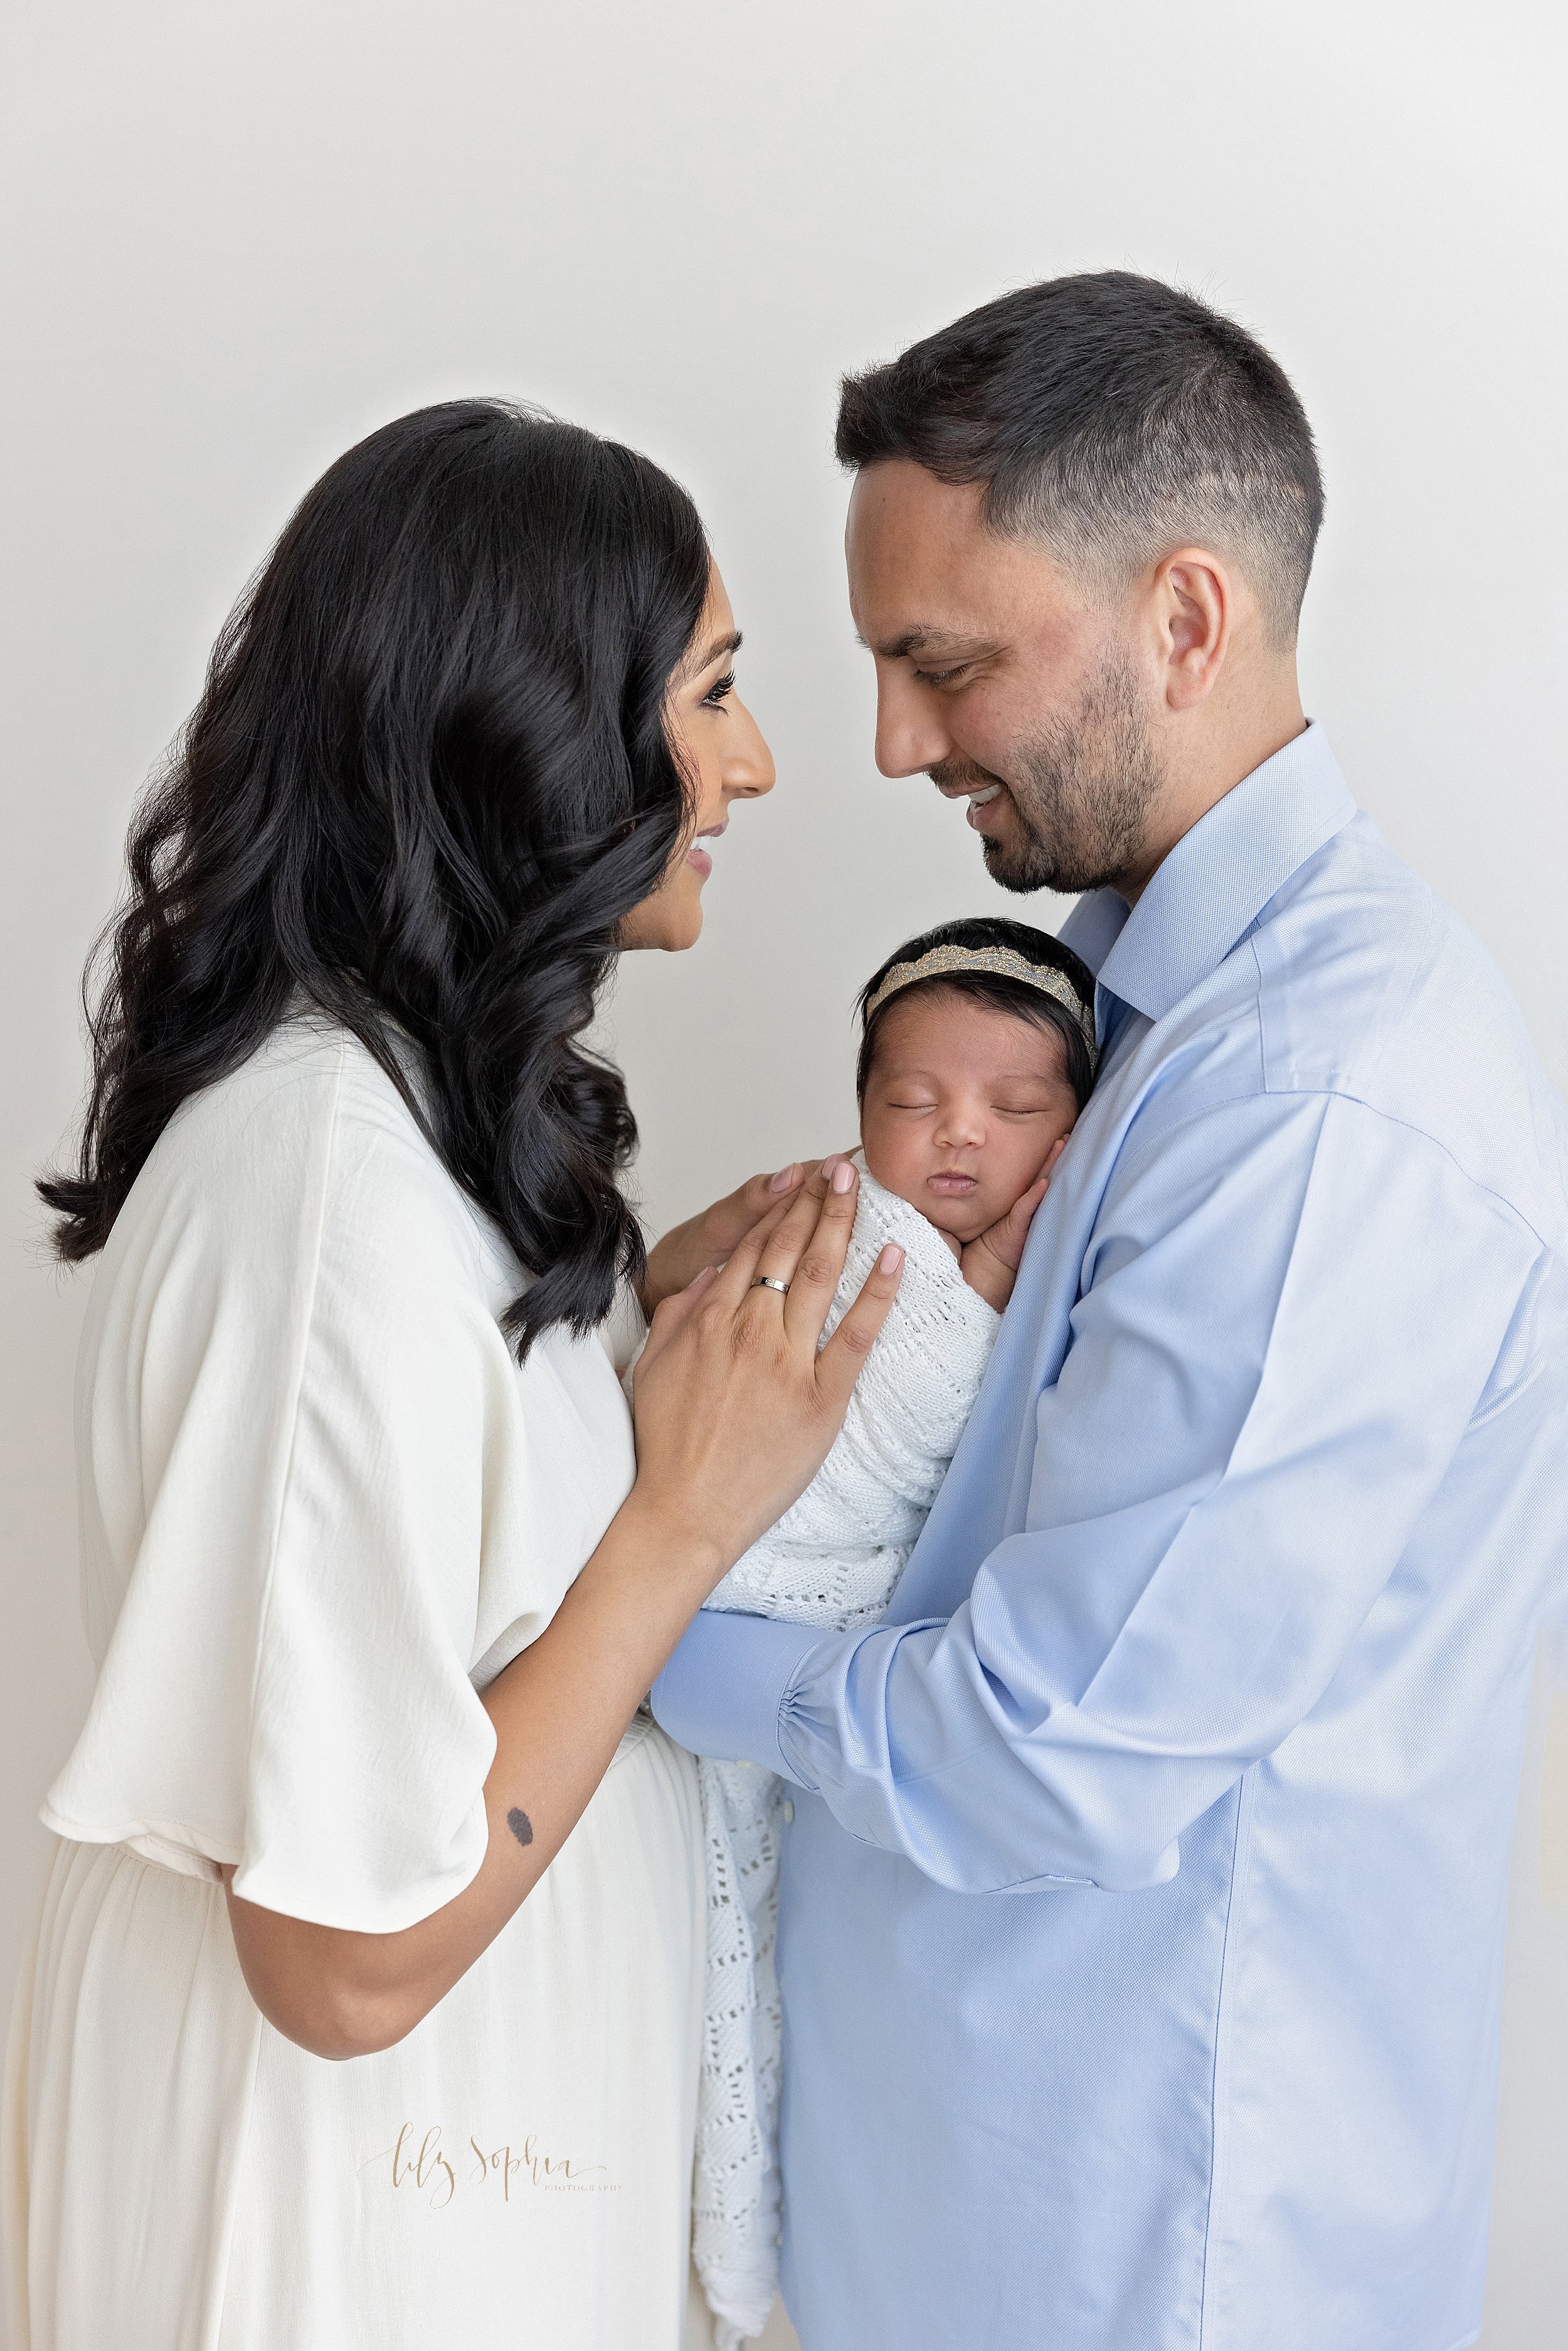  Newborn family photo of an Indian father holding his sleeping newborn baby daughter against his chest as his wife faces him and places her hands on their daughter’s back while the parents smile lovingly at one another taken in natural light in a pho